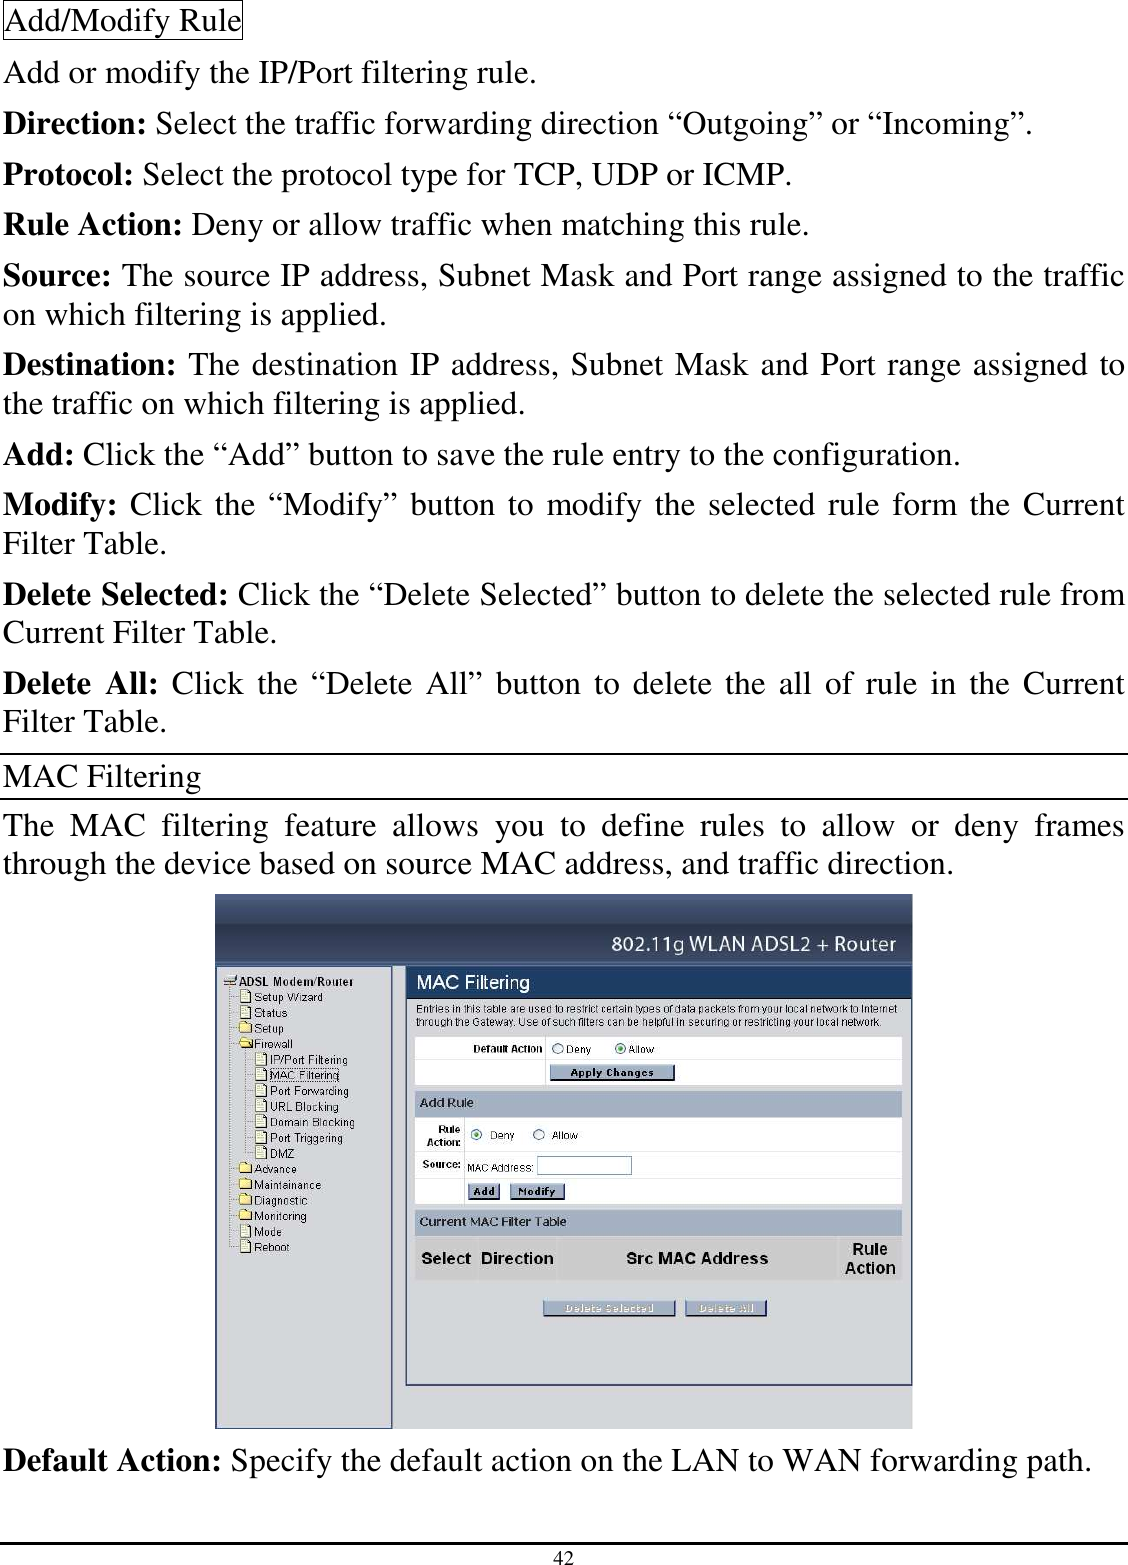 42 Add/Modify Rule Add or modify the IP/Port filtering rule. Direction: Select the traffic forwarding direction “Outgoing” or “Incoming”. Protocol: Select the protocol type for TCP, UDP or ICMP. Rule Action: Deny or allow traffic when matching this rule. Source: The source IP address, Subnet Mask and Port range assigned to the traffic on which filtering is applied. Destination: The destination IP address, Subnet Mask and Port range assigned to the traffic on which filtering is applied. Add: Click the “Add” button to save the rule entry to the configuration. Modify: Click the “Modify” button to modify the selected rule form the Current Filter Table. Delete Selected: Click the “Delete Selected” button to delete the selected rule from Current Filter Table. Delete  All: Click the “Delete All” button to delete the all of rule in the Current Filter Table. MAC Filtering The  MAC  filtering  feature  allows  you  to  define  rules  to  allow  or  deny  frames through the device based on source MAC address, and traffic direction.  Default Action: Specify the default action on the LAN to WAN forwarding path. 